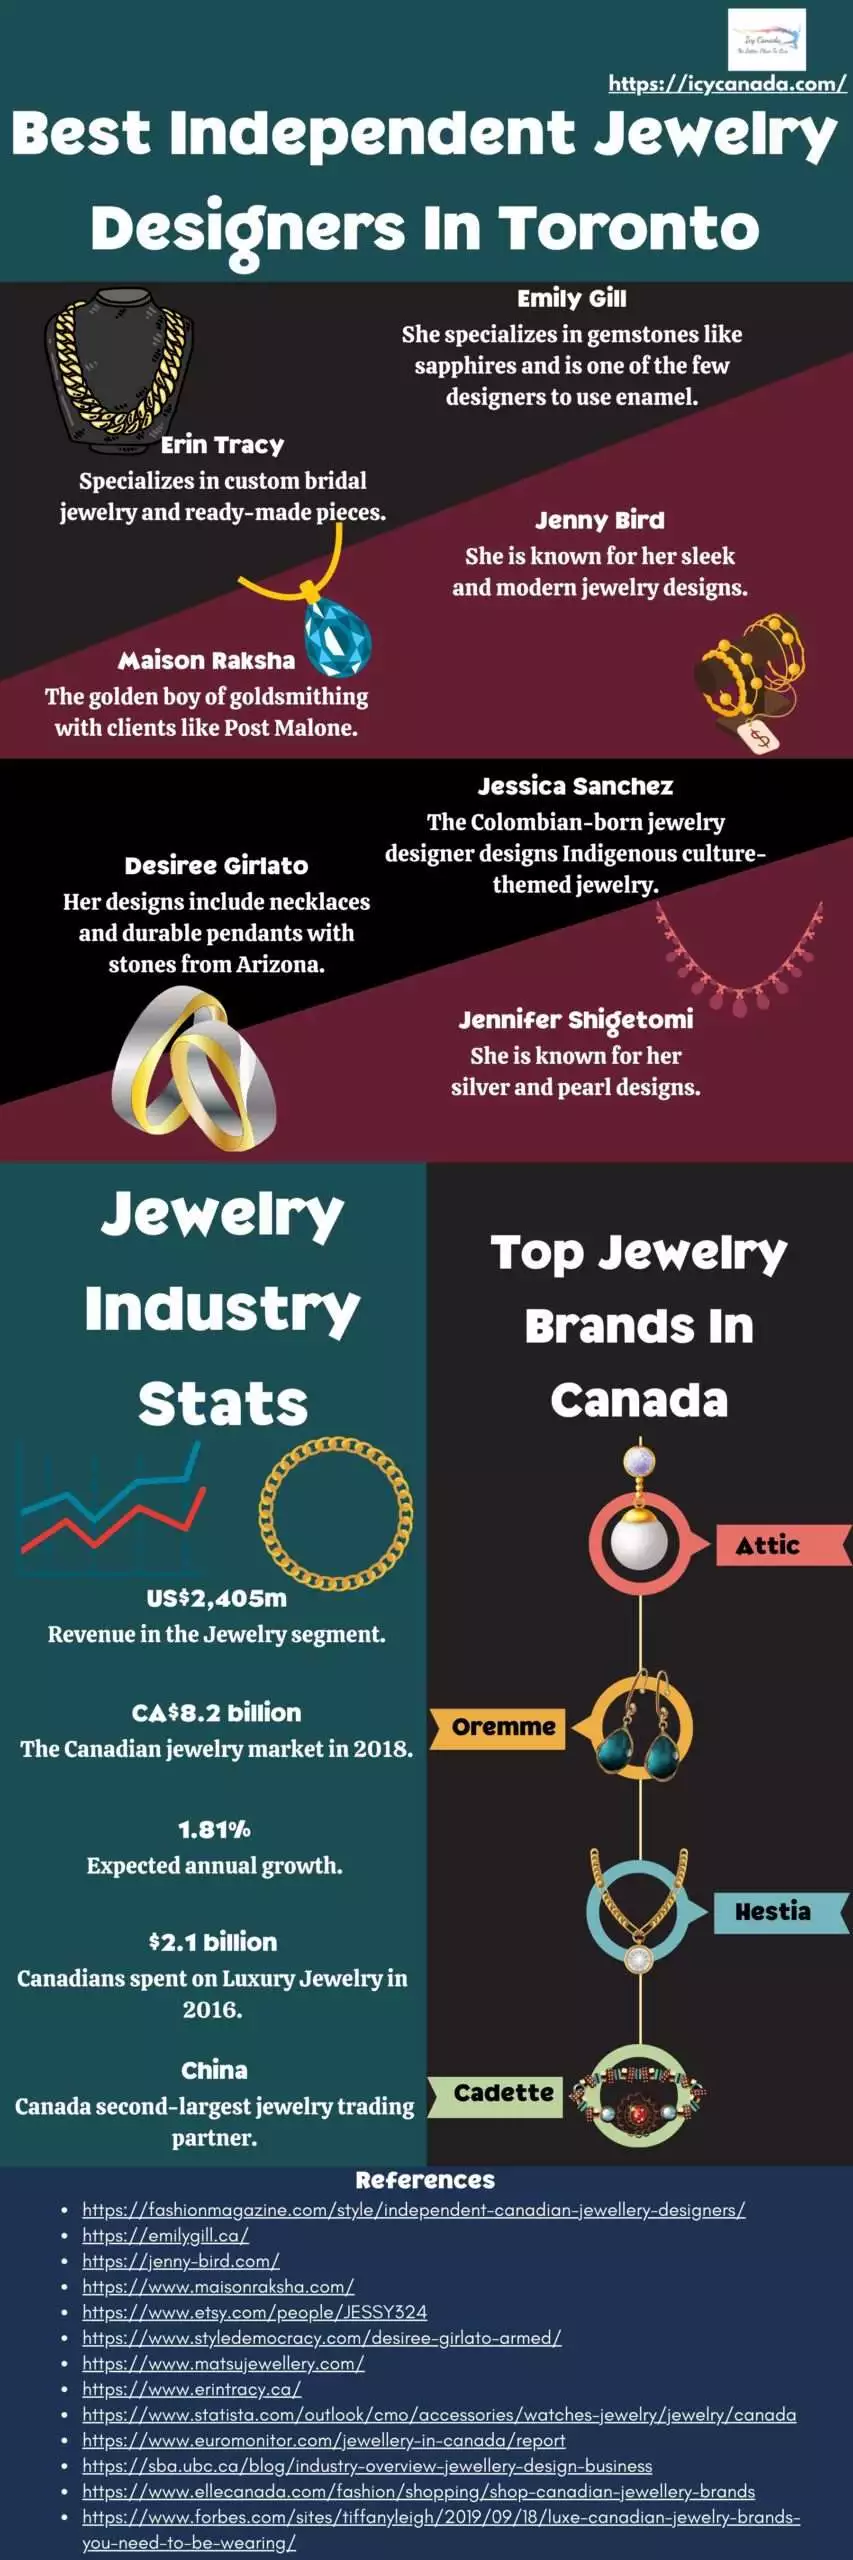 Best Independent Jewelry Designers In Canada